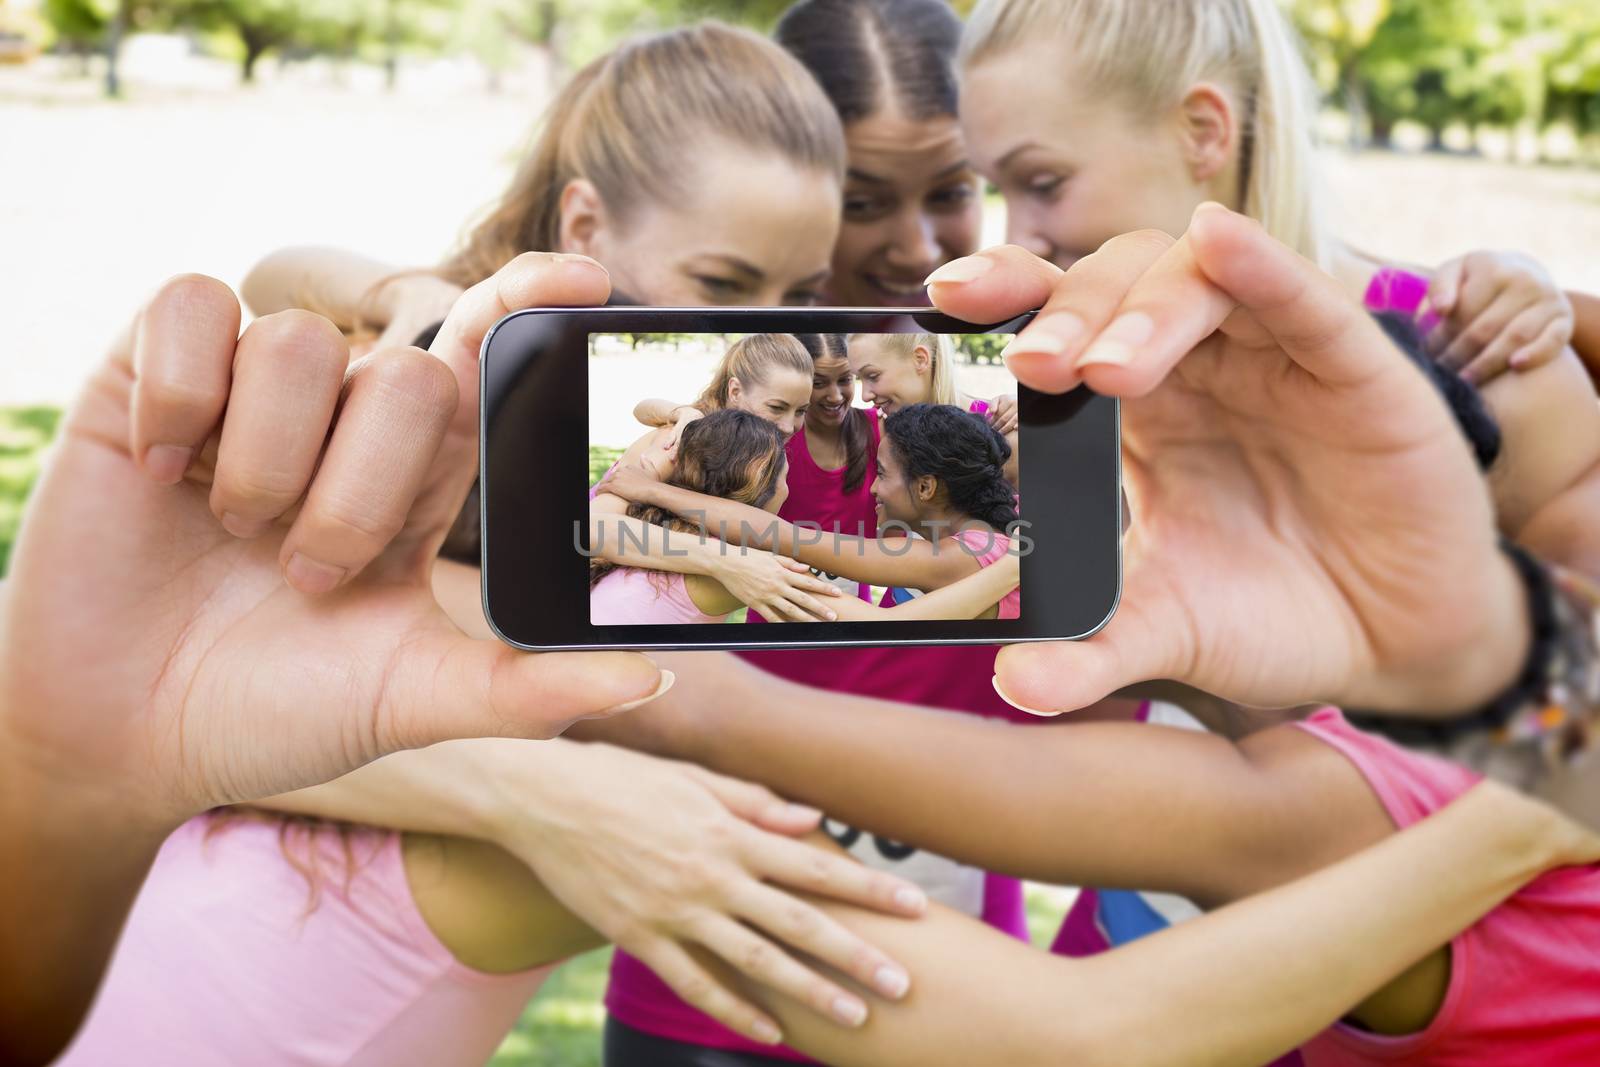 Composite image of hand holding smartphone showing photograph of breast cancer activists